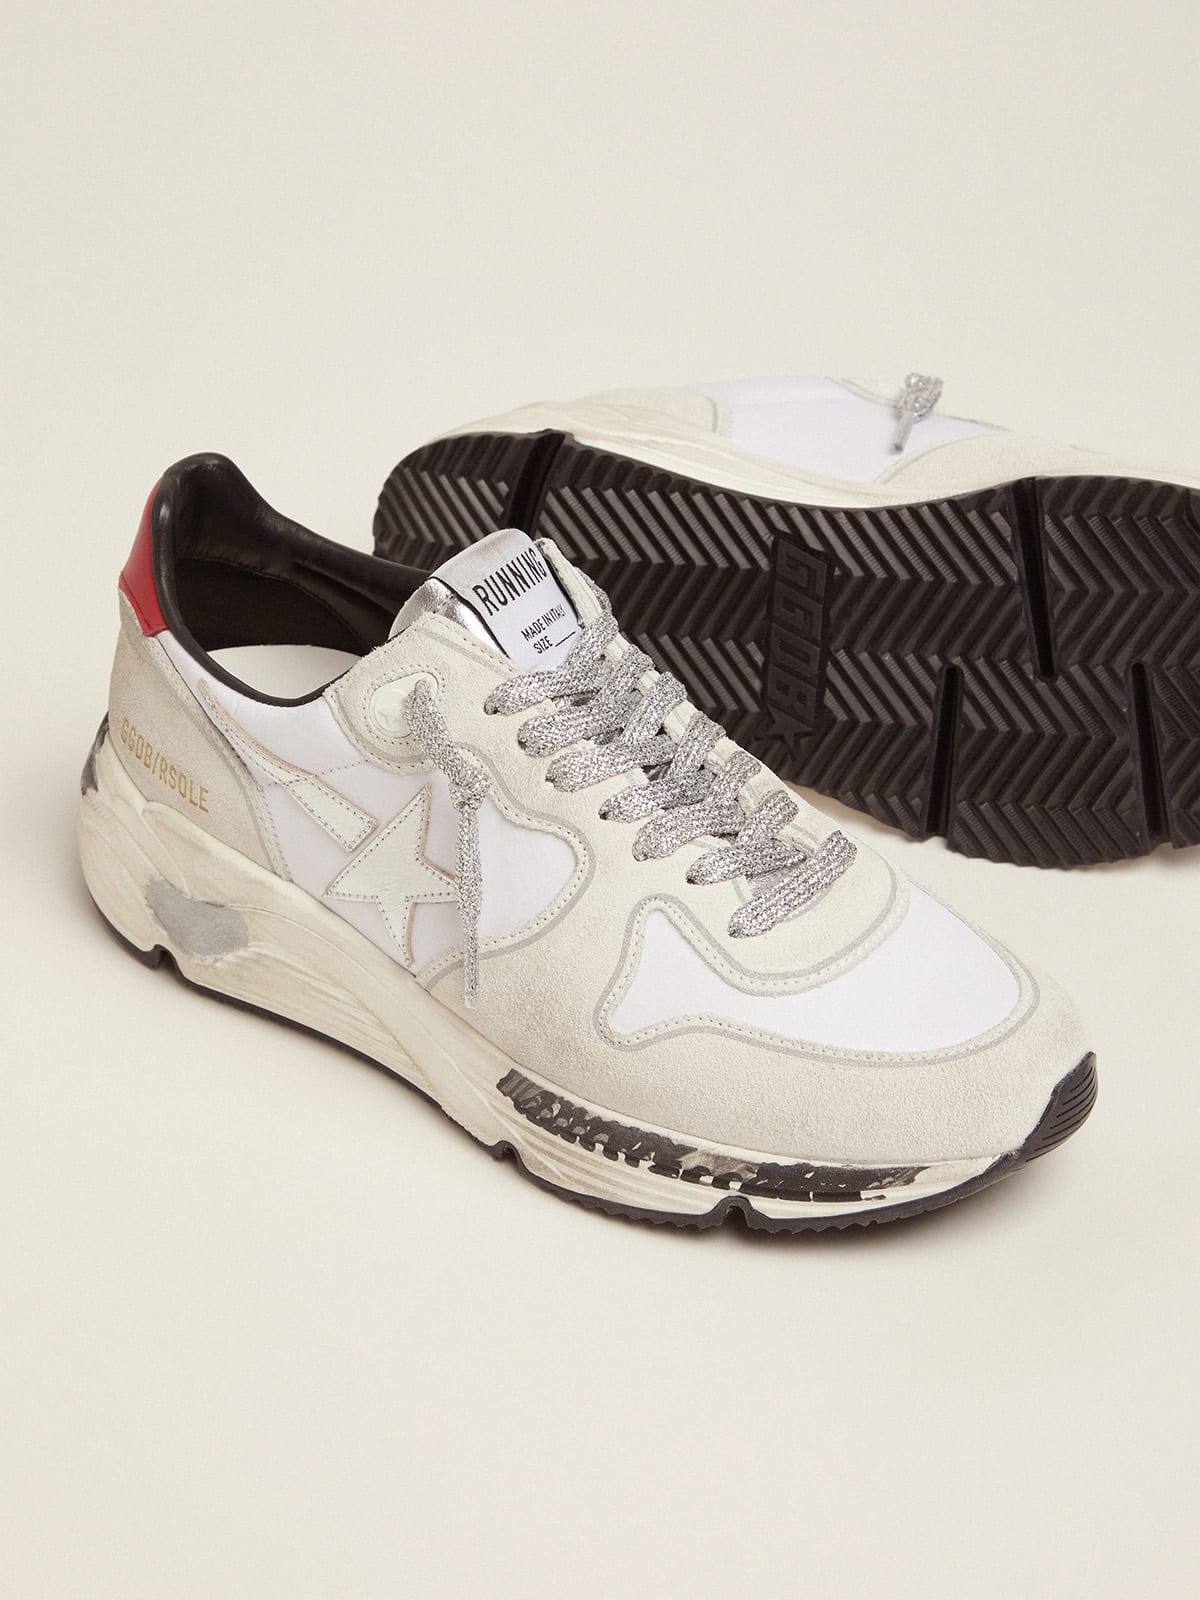 Running Sole sneakers with red heel tab and silver star | Golden Goose